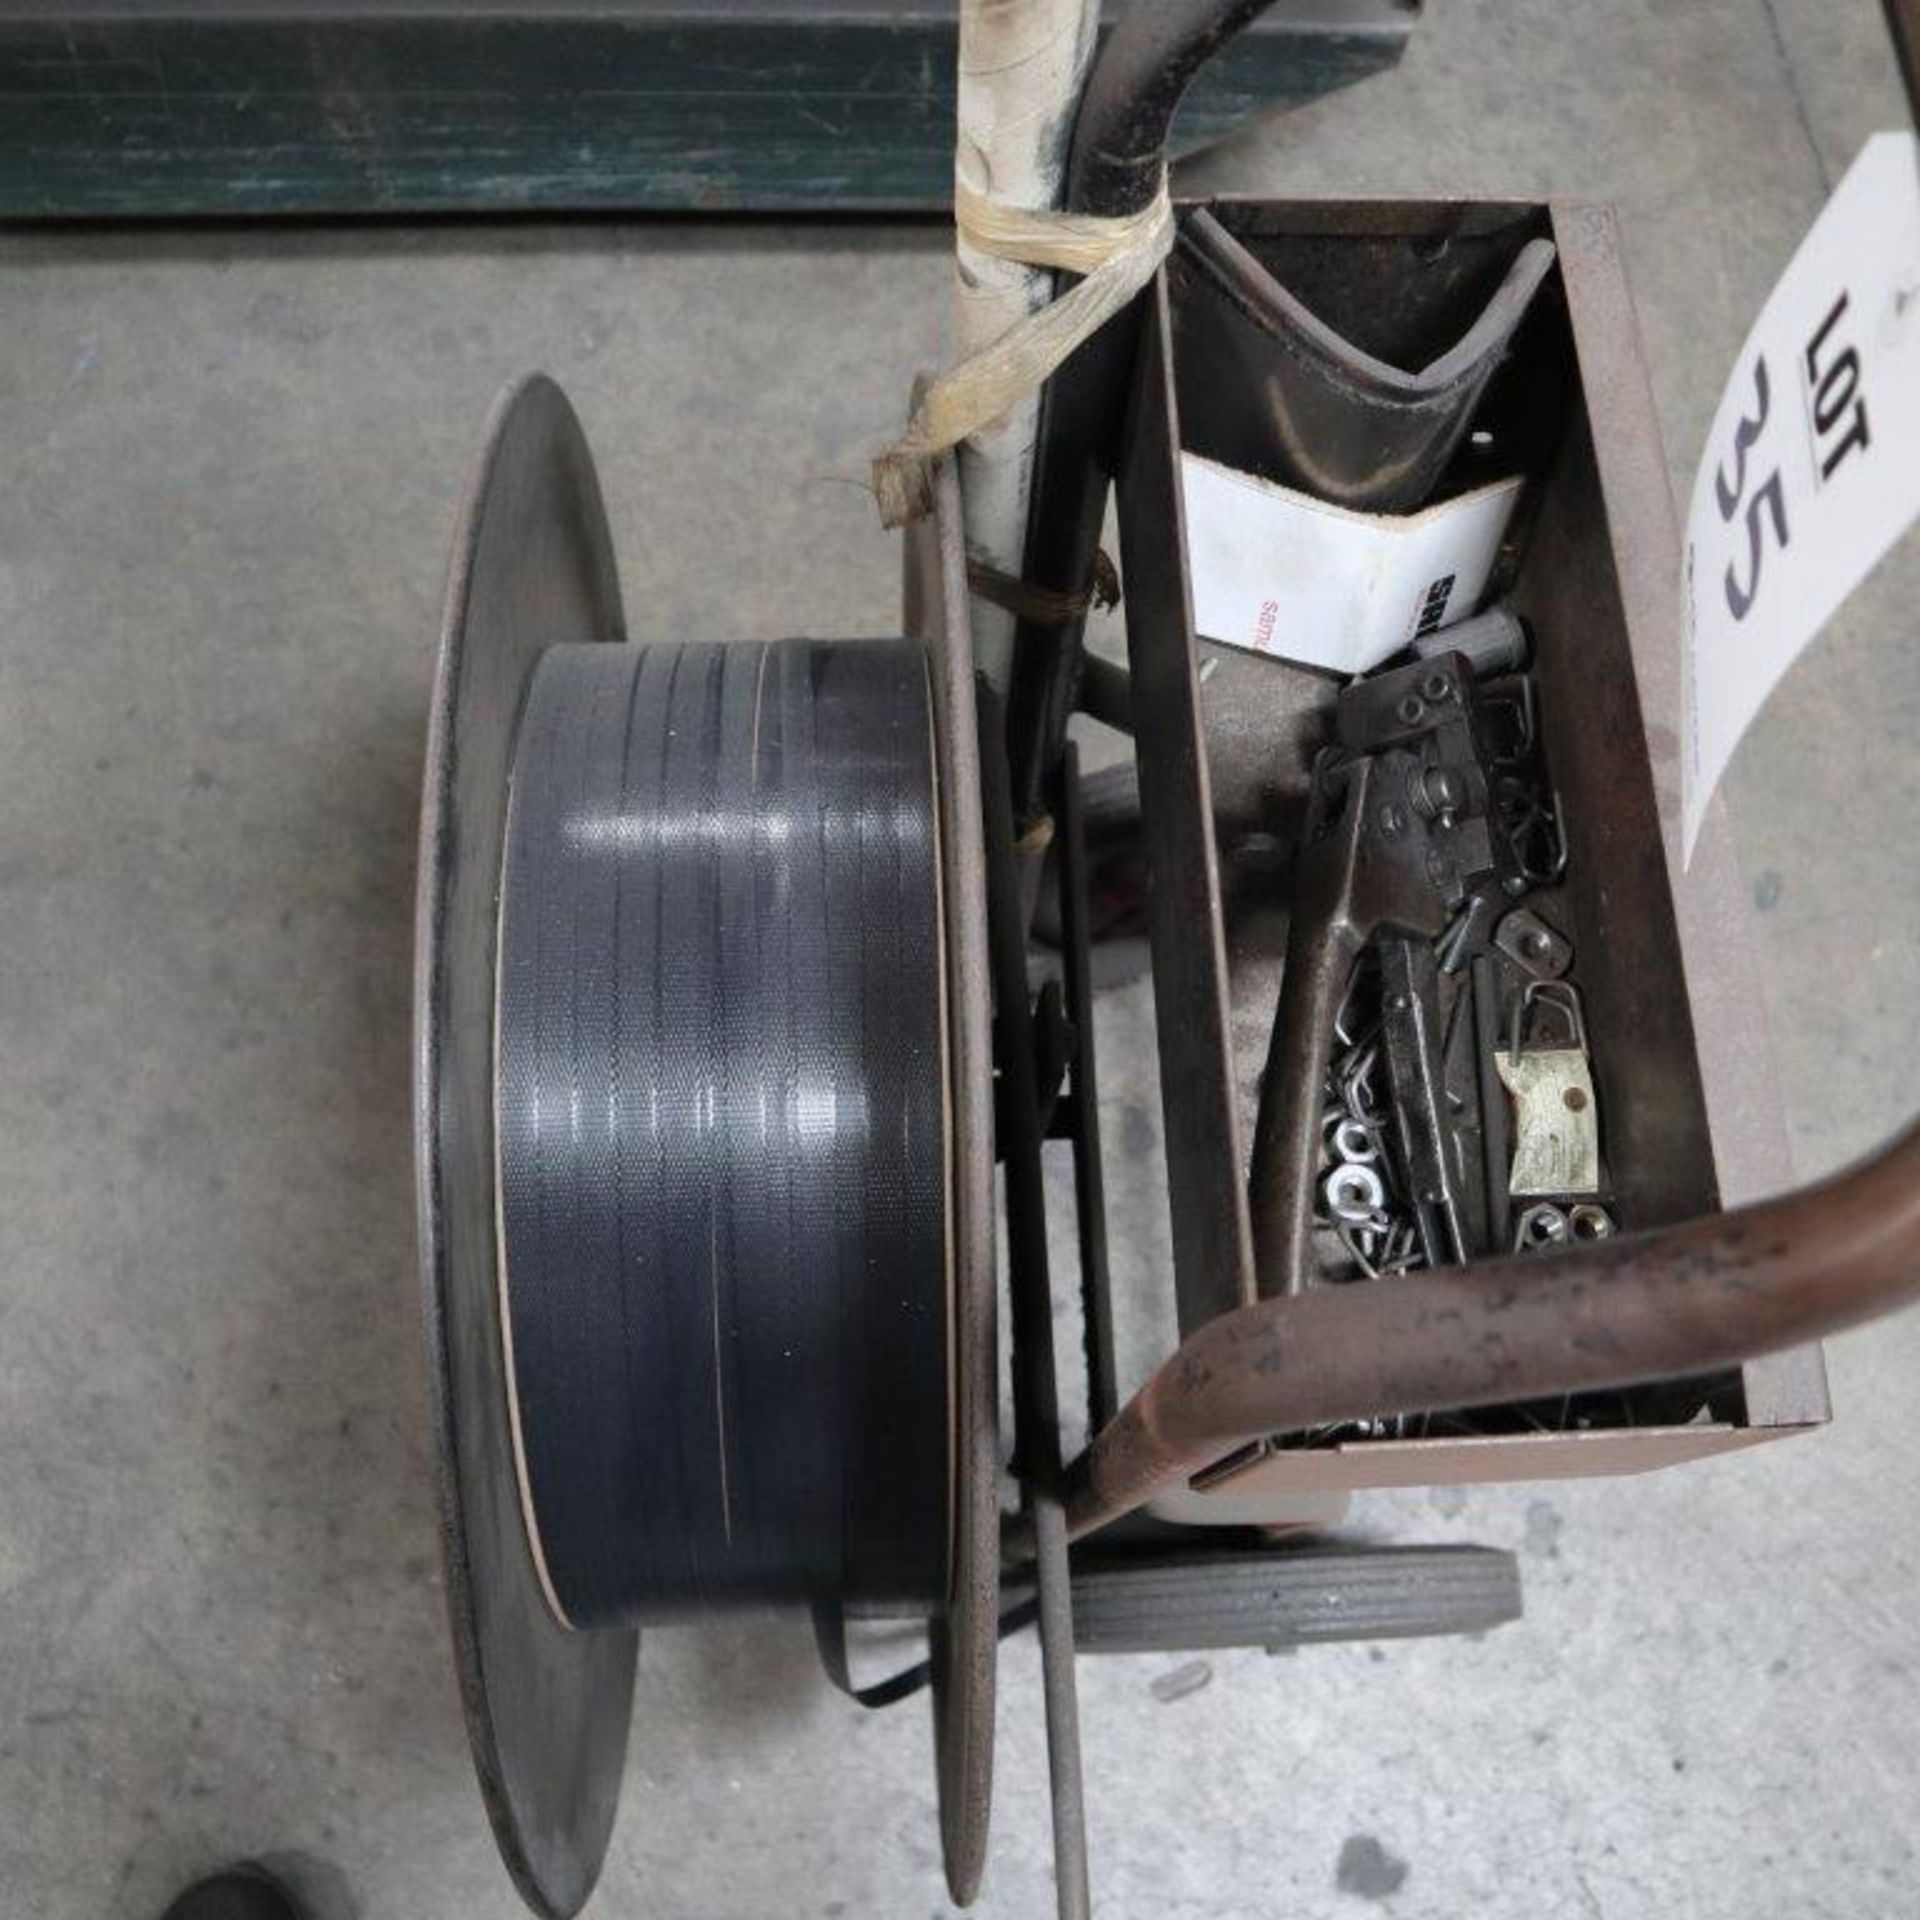 BANDING CART, PLASTIC BANDING, WITH CONTENTS - Image 2 of 2